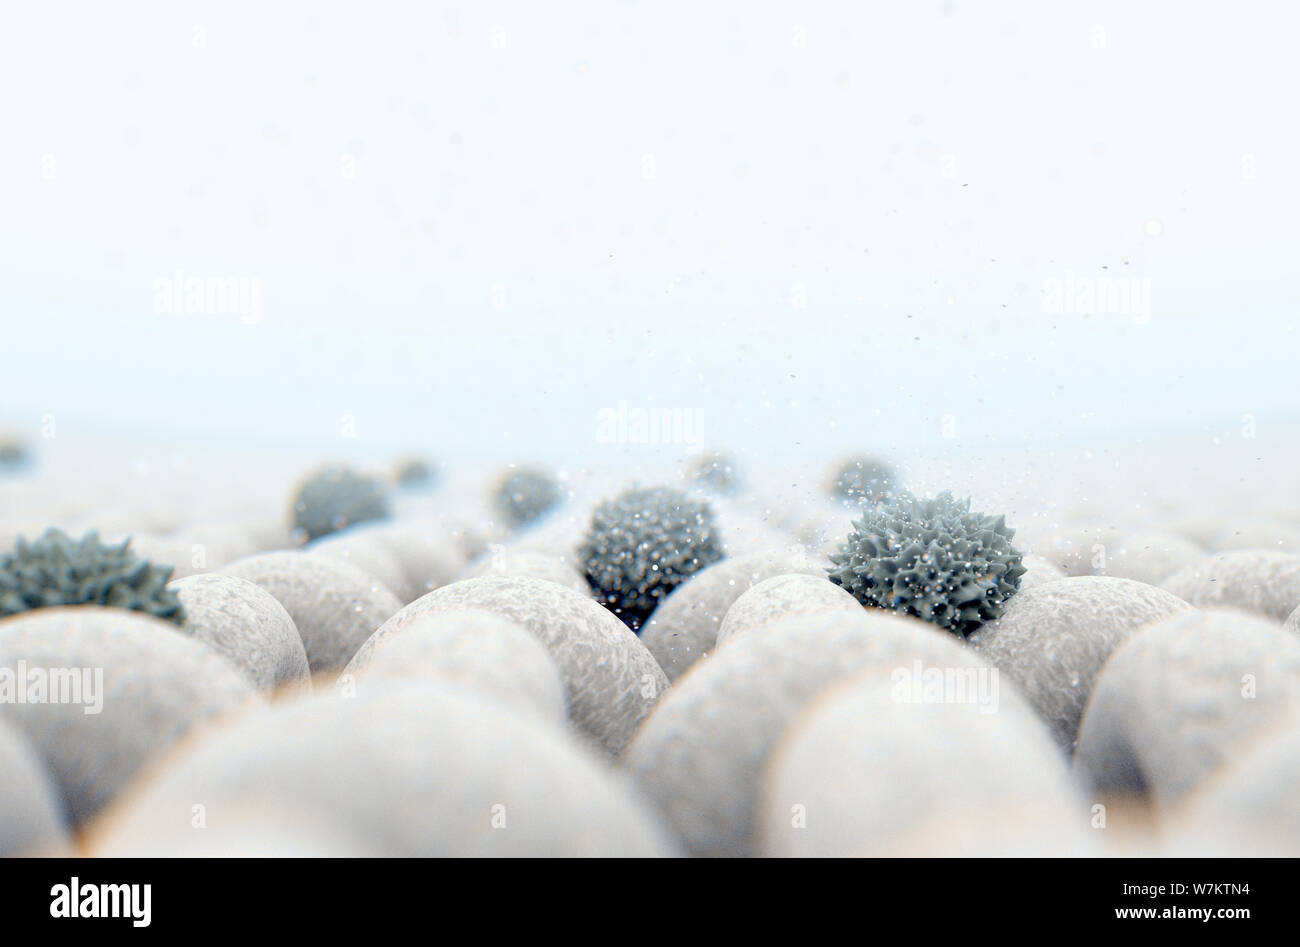 A microscopic close up view of a simple woven textile and a visible germ particle  - 3D render Stock Photo